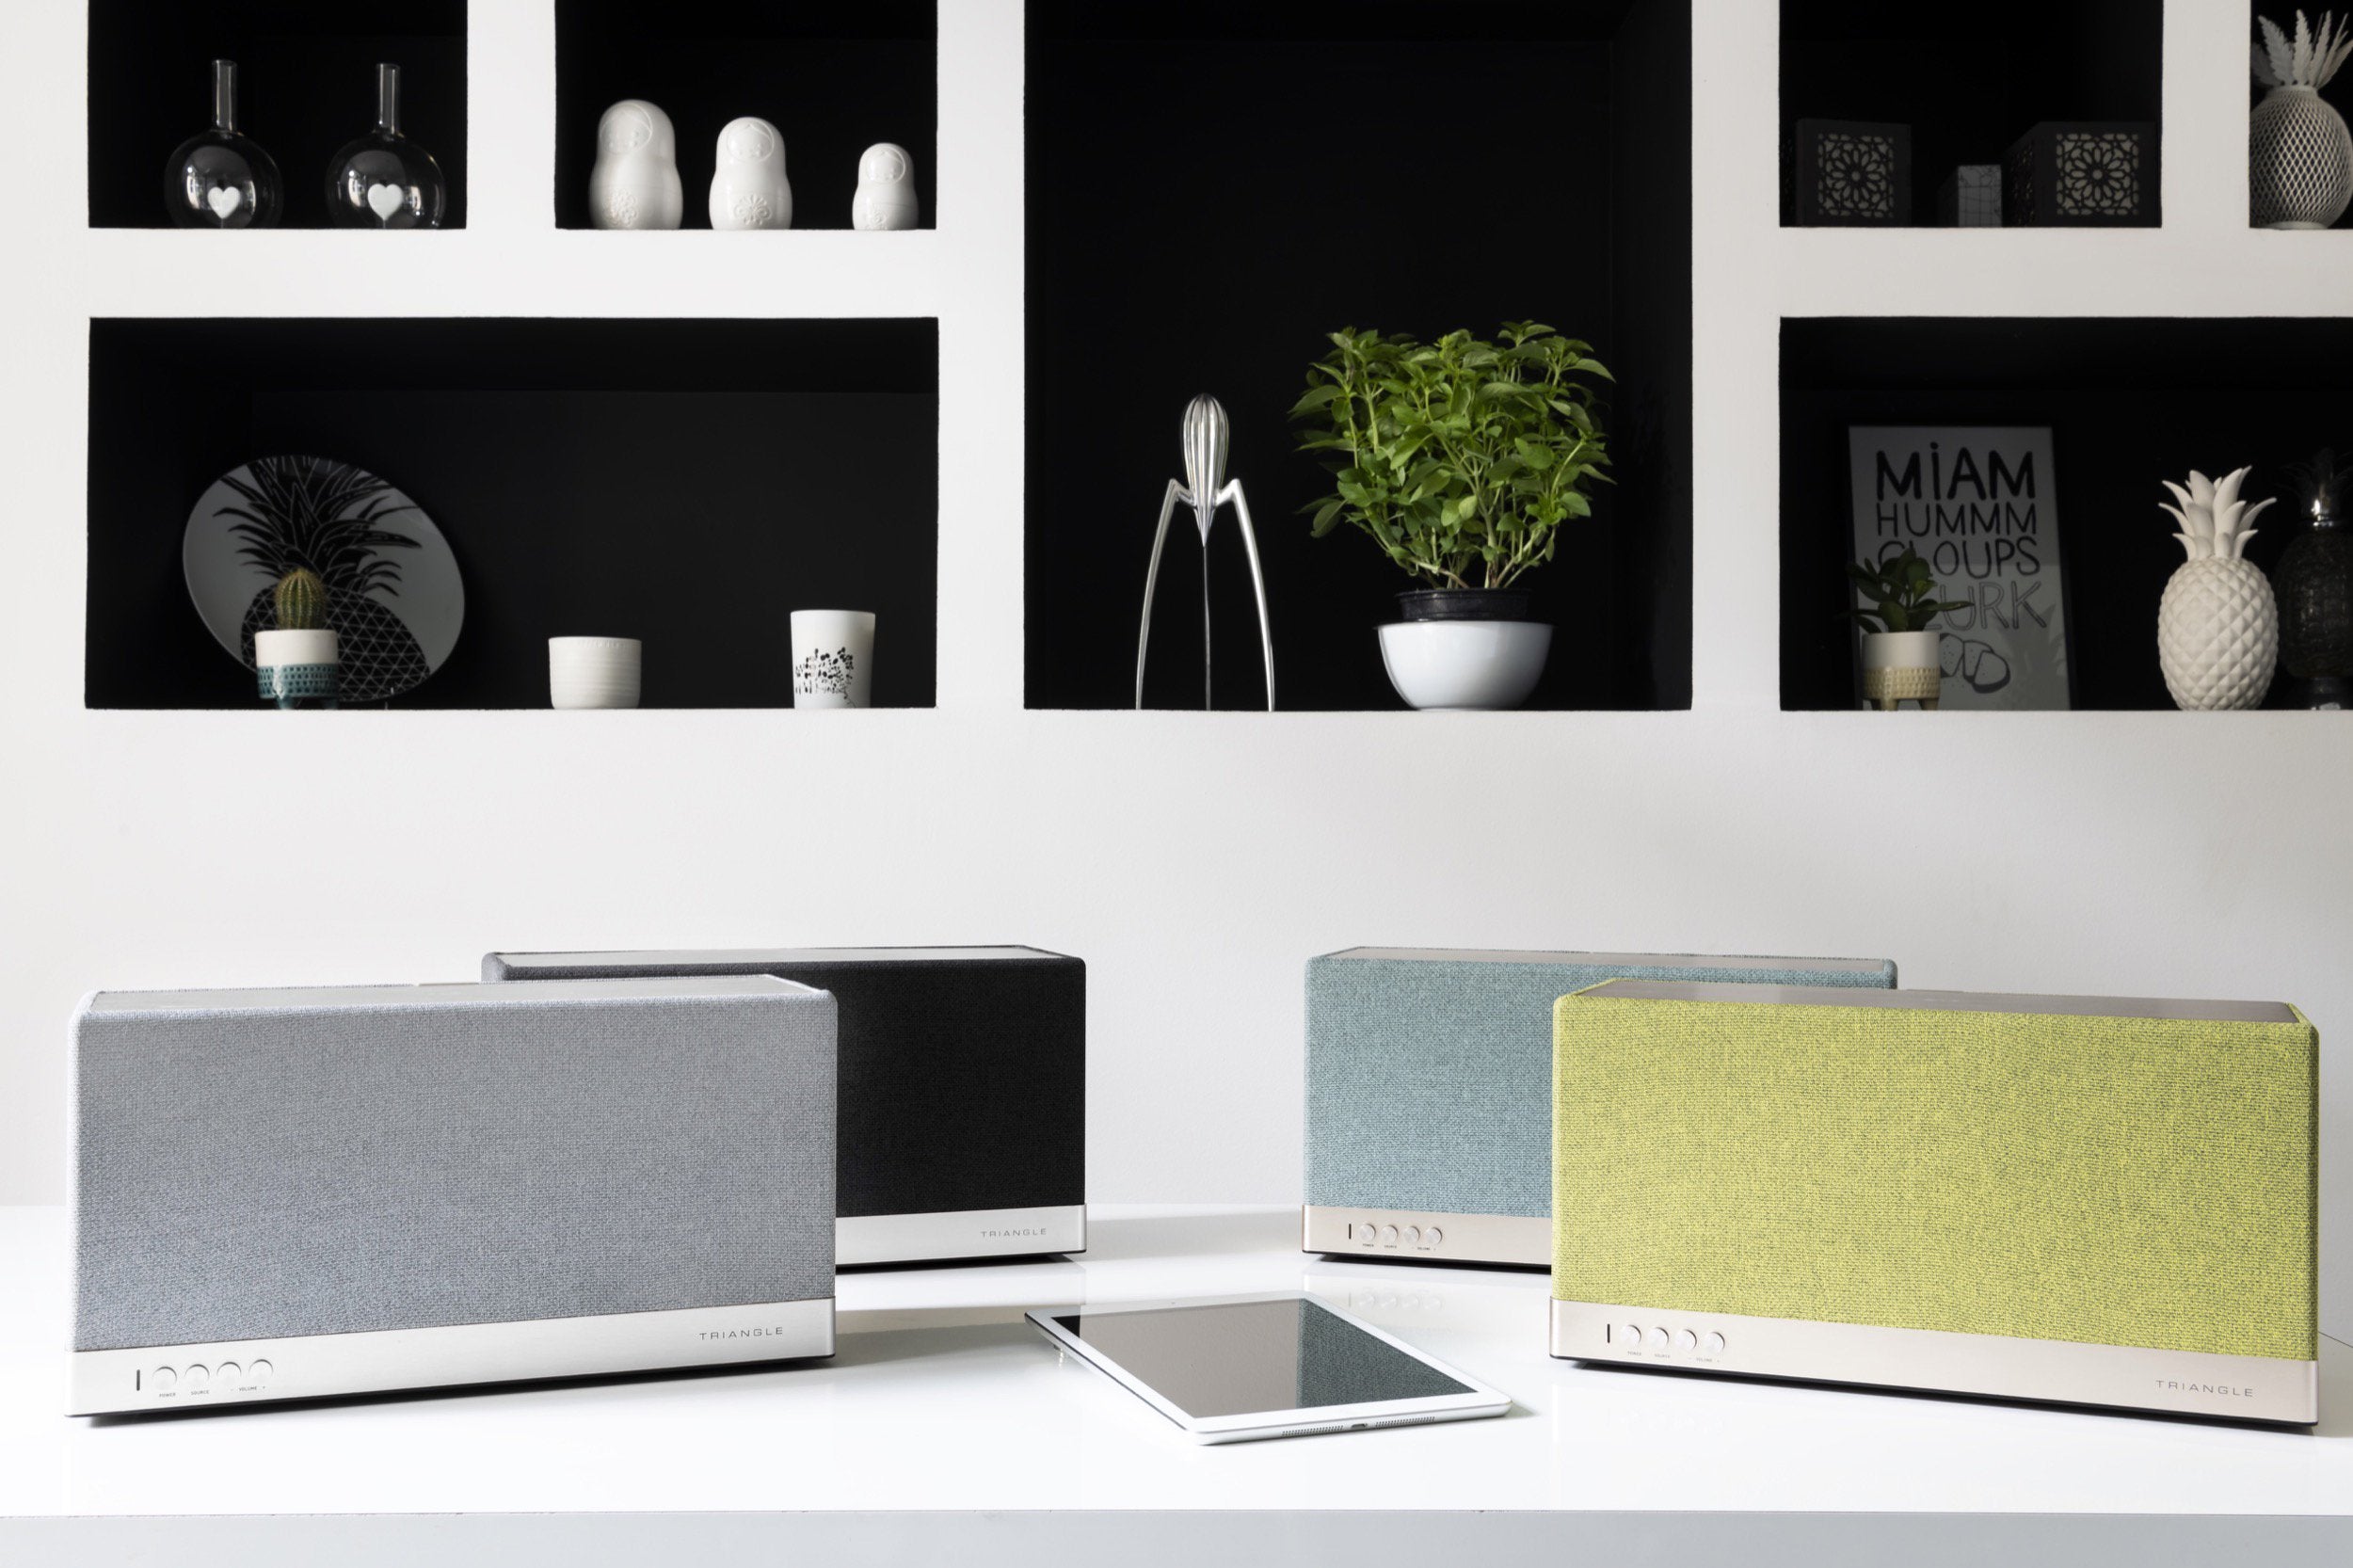 TRIANGLE AIO 3 bluetooth speaker. With the perfect blend of French craftsmanship and modern technology, you can enjoy AIO 3 high-resolution sound in every room and control everything with a dedicated app.